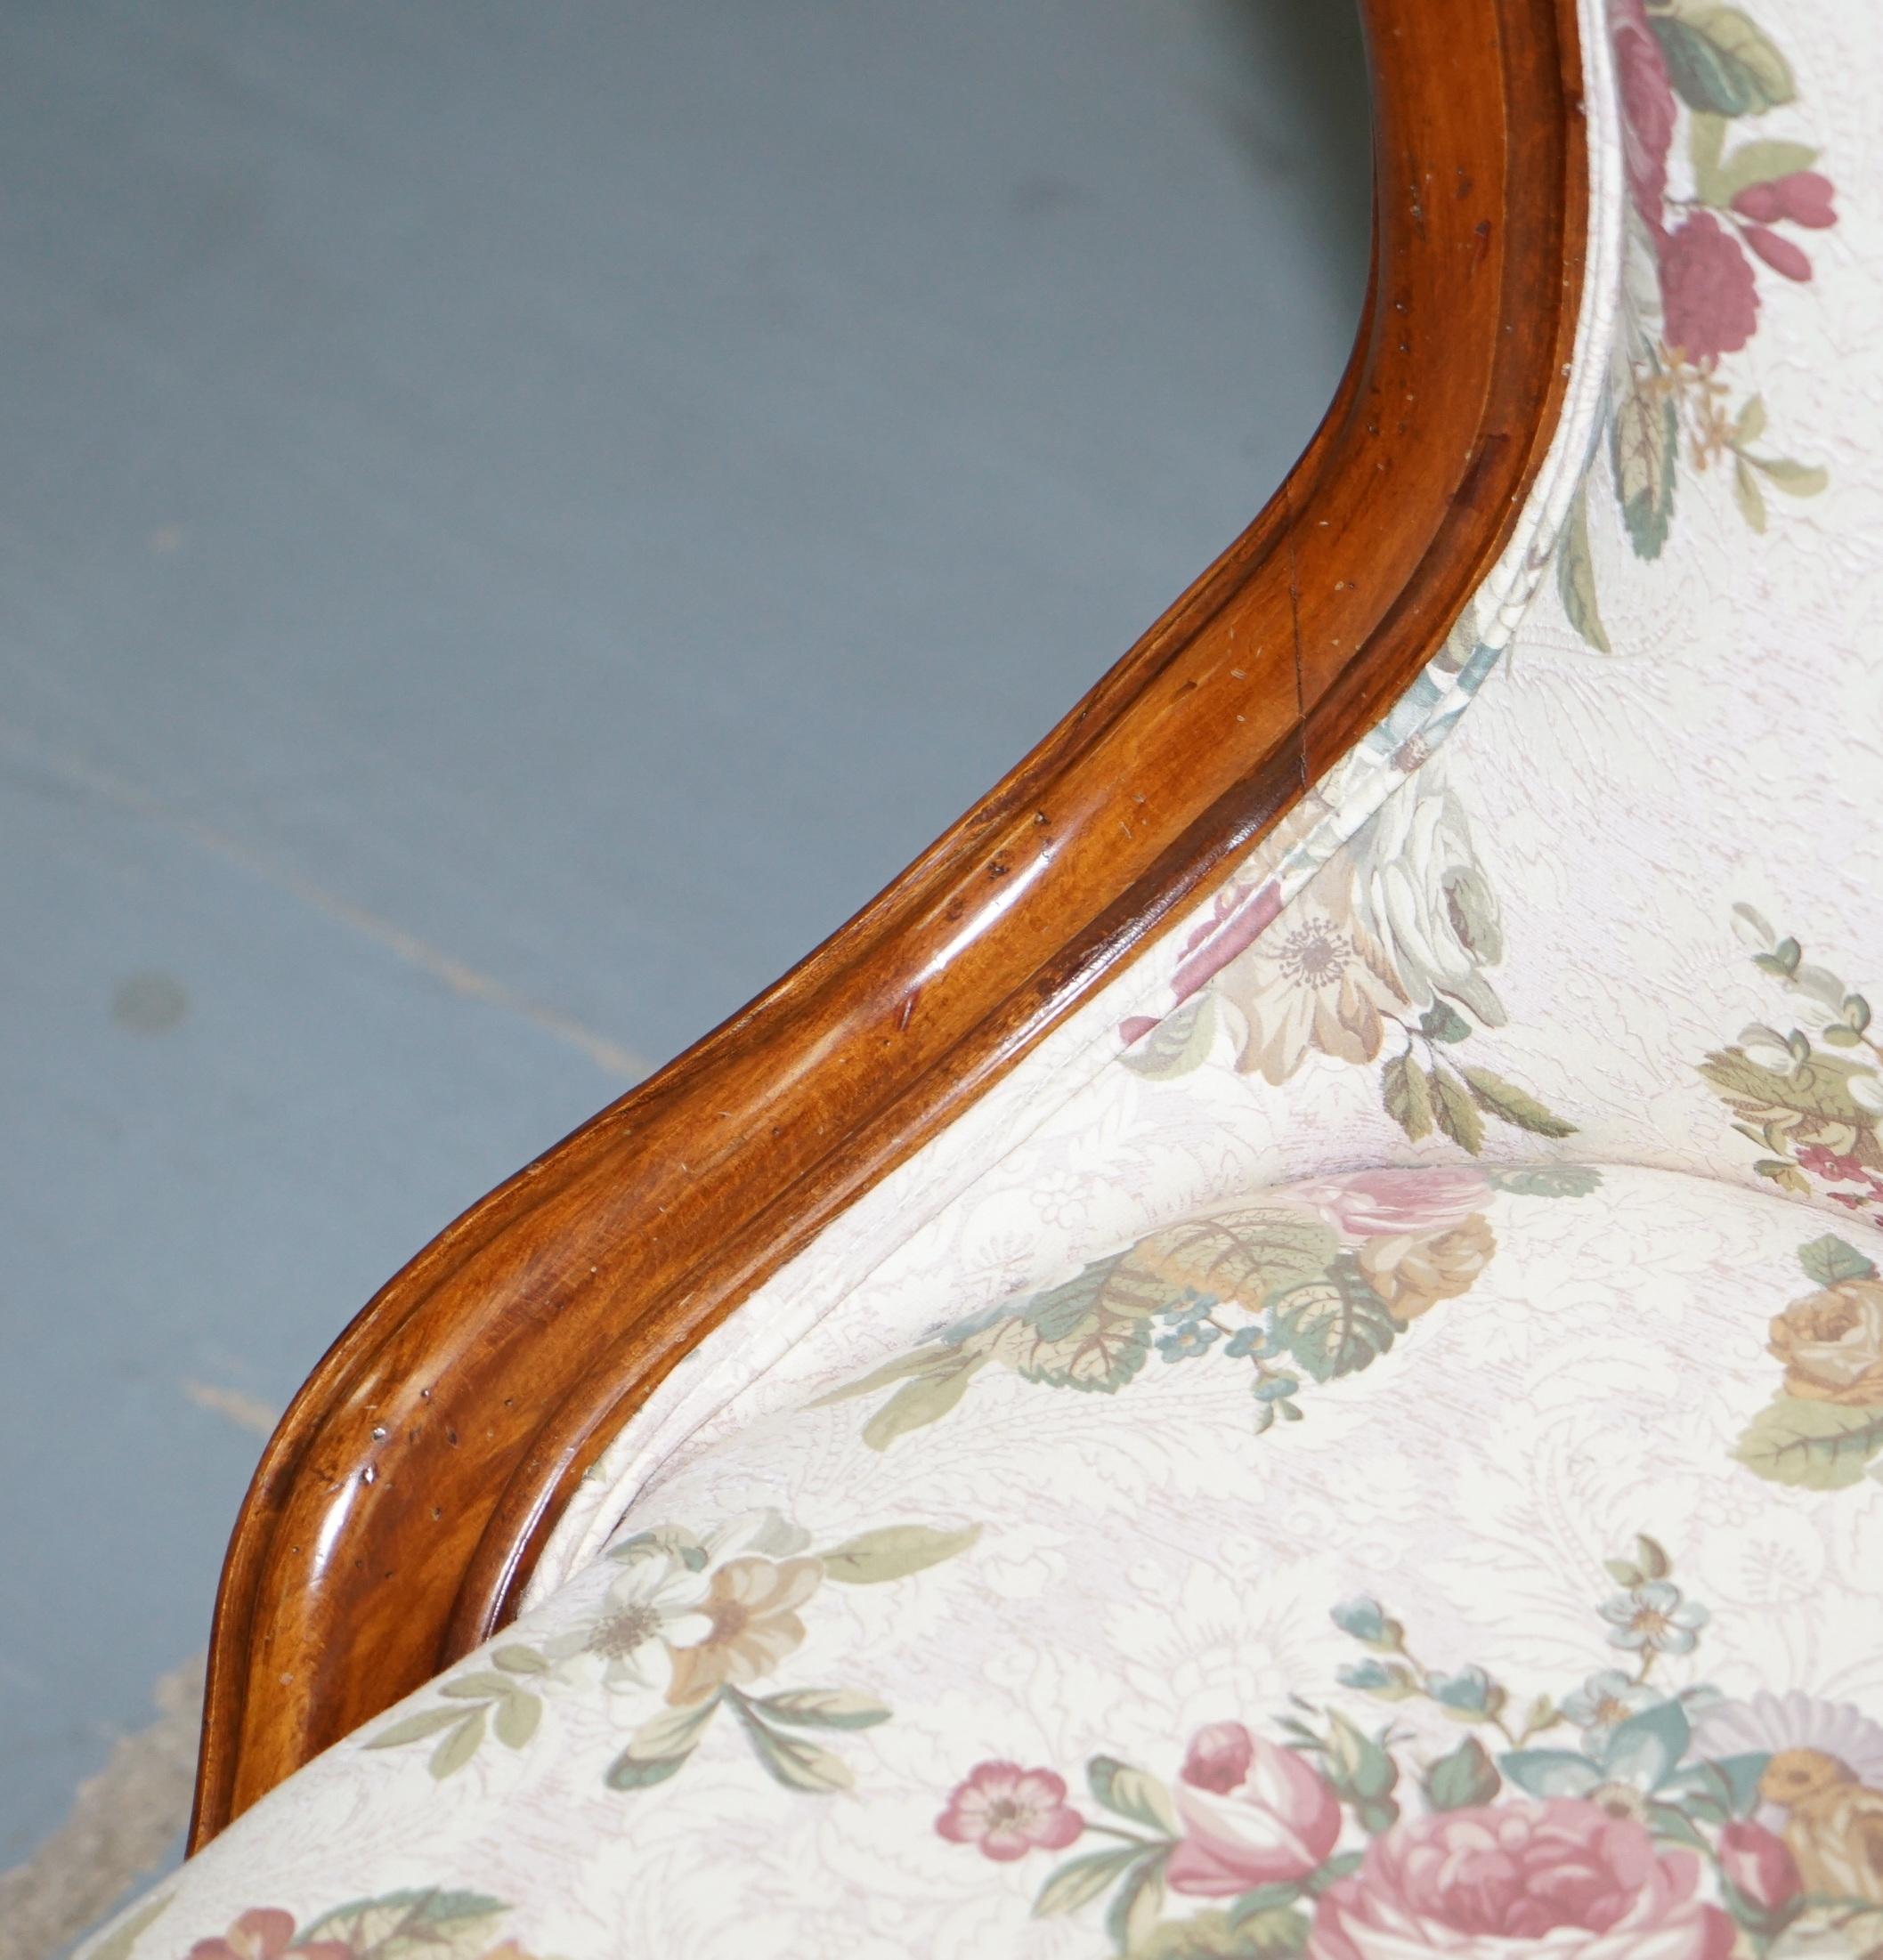 Carved Lovely Victorian Walnut Framed with Floral Upholstery Nursing Chair or Armchair